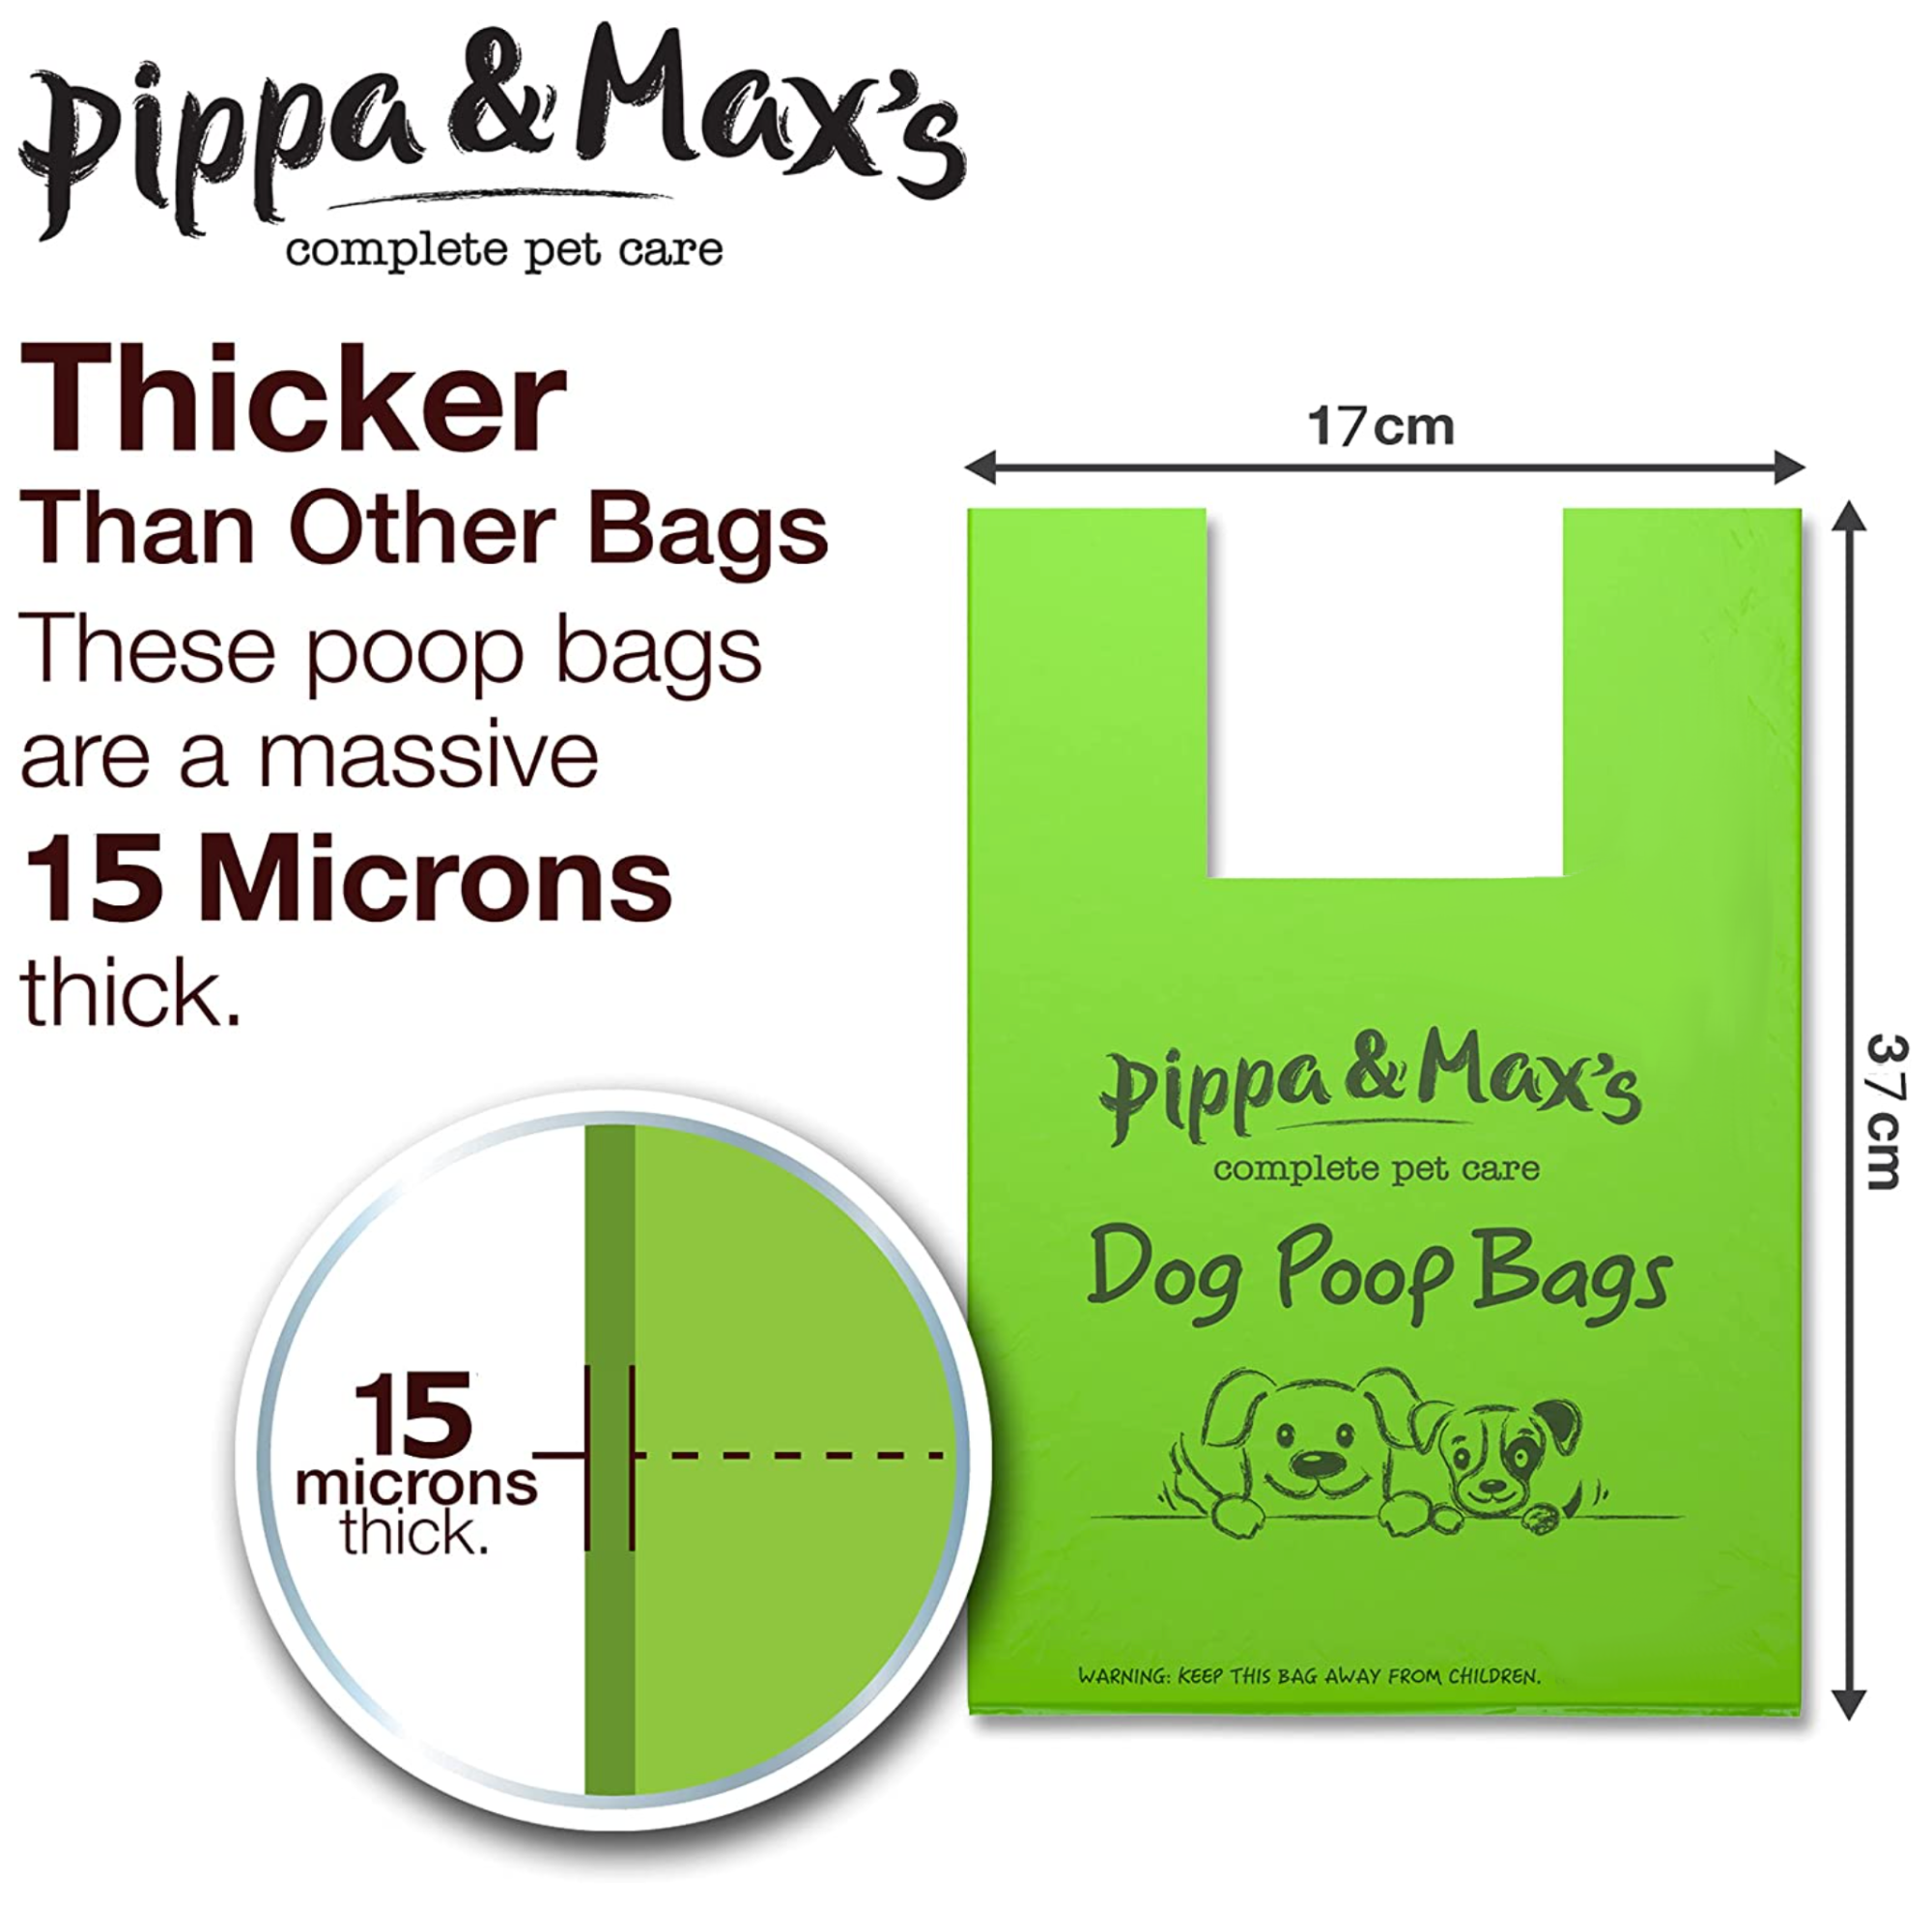 Pippa & Max Dog Poo Bags | Easy-Tie Handles, Heavy-Duty & Leak-Proof | Large Size for All Breeds | Pet Poop Cleanup | Pack of 300